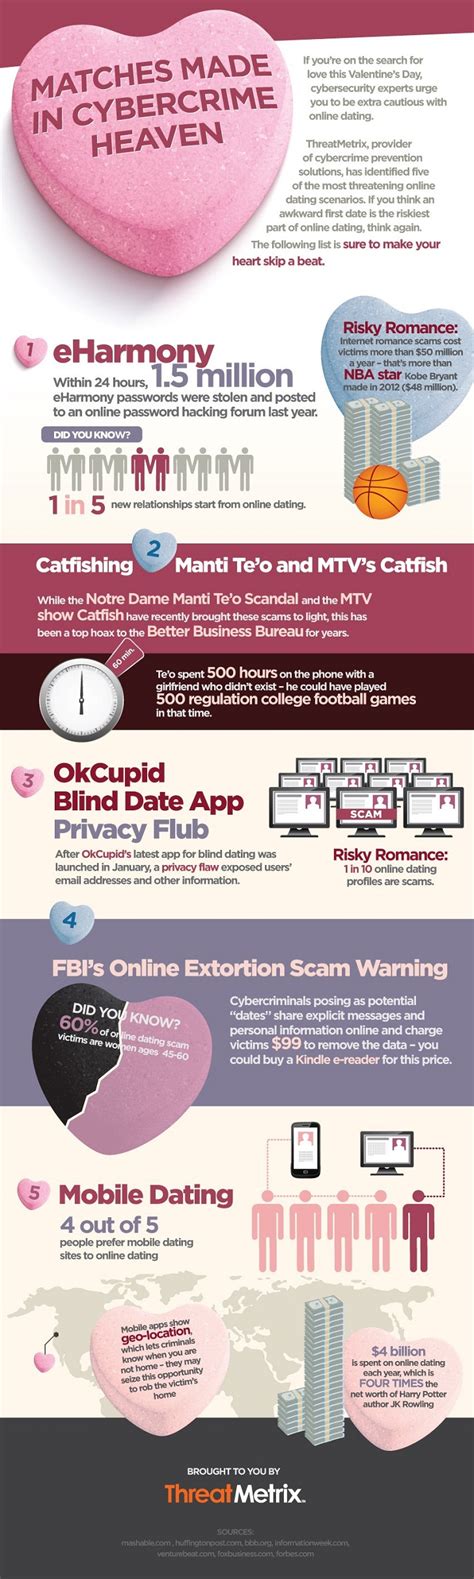 The perpator wants money and the victim wants love and attention. Online Dating Scams Cost Victims Tens of Millions of ...